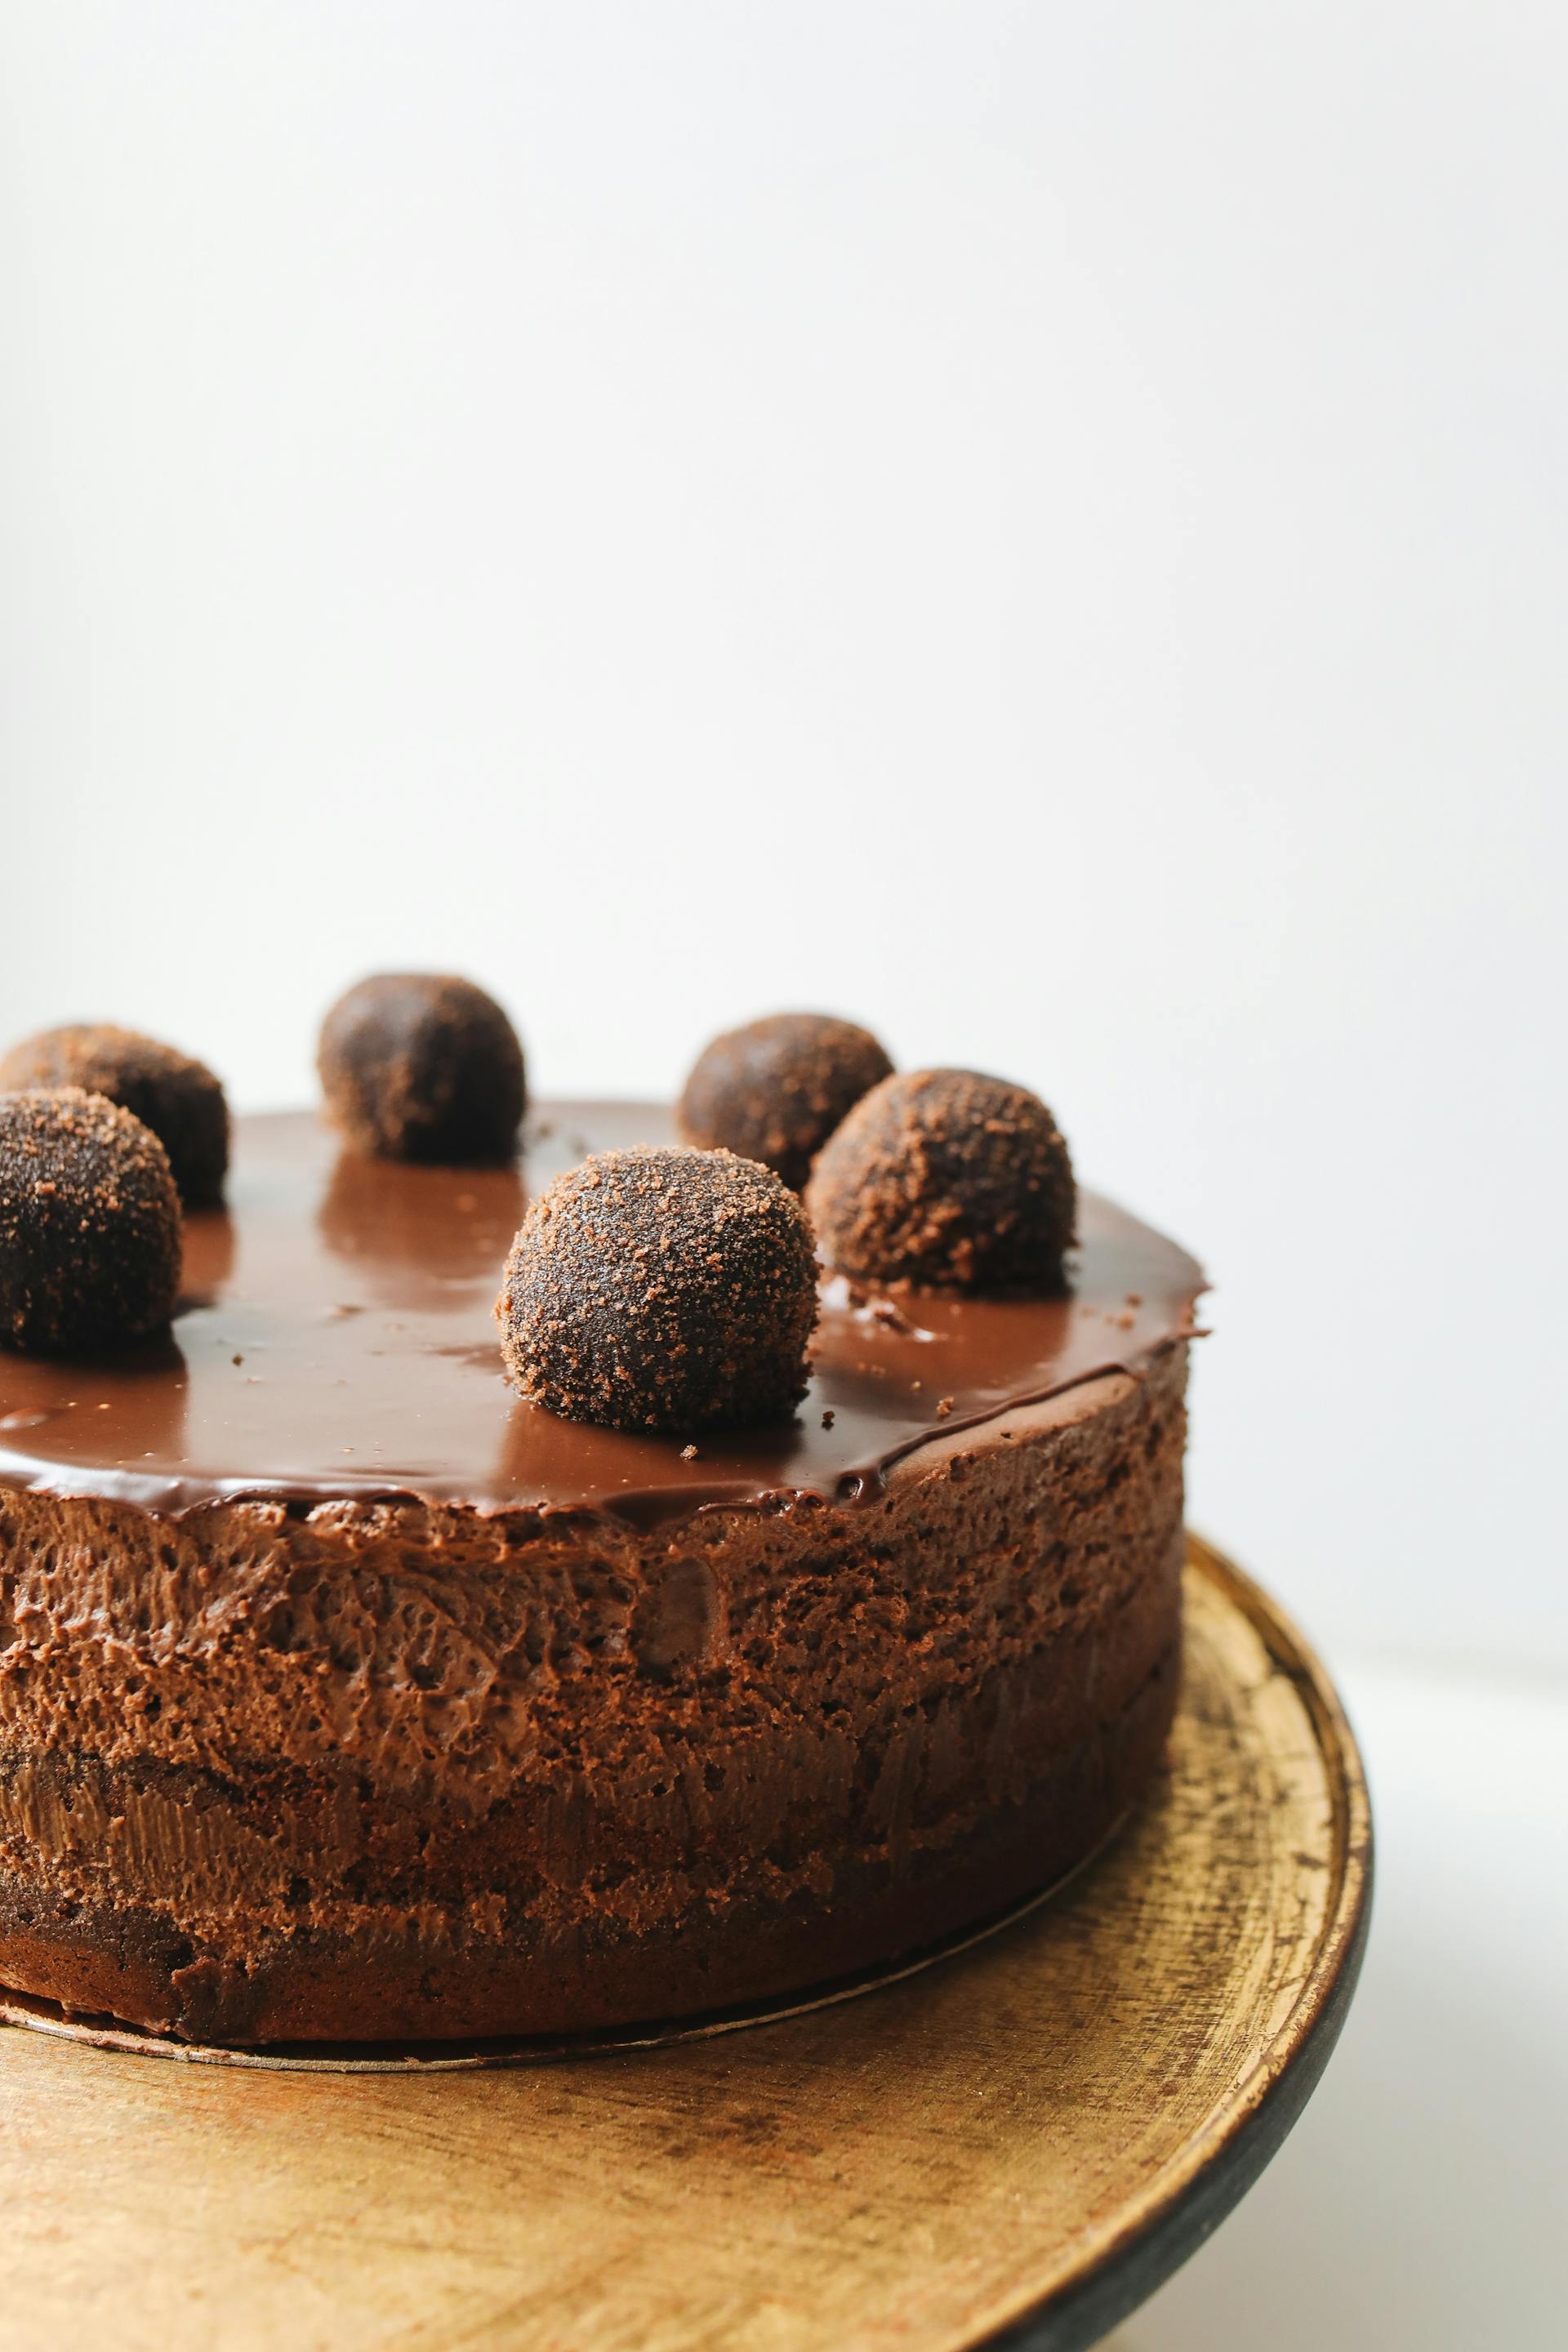 Chocolate cake on a board | Source: Pexels